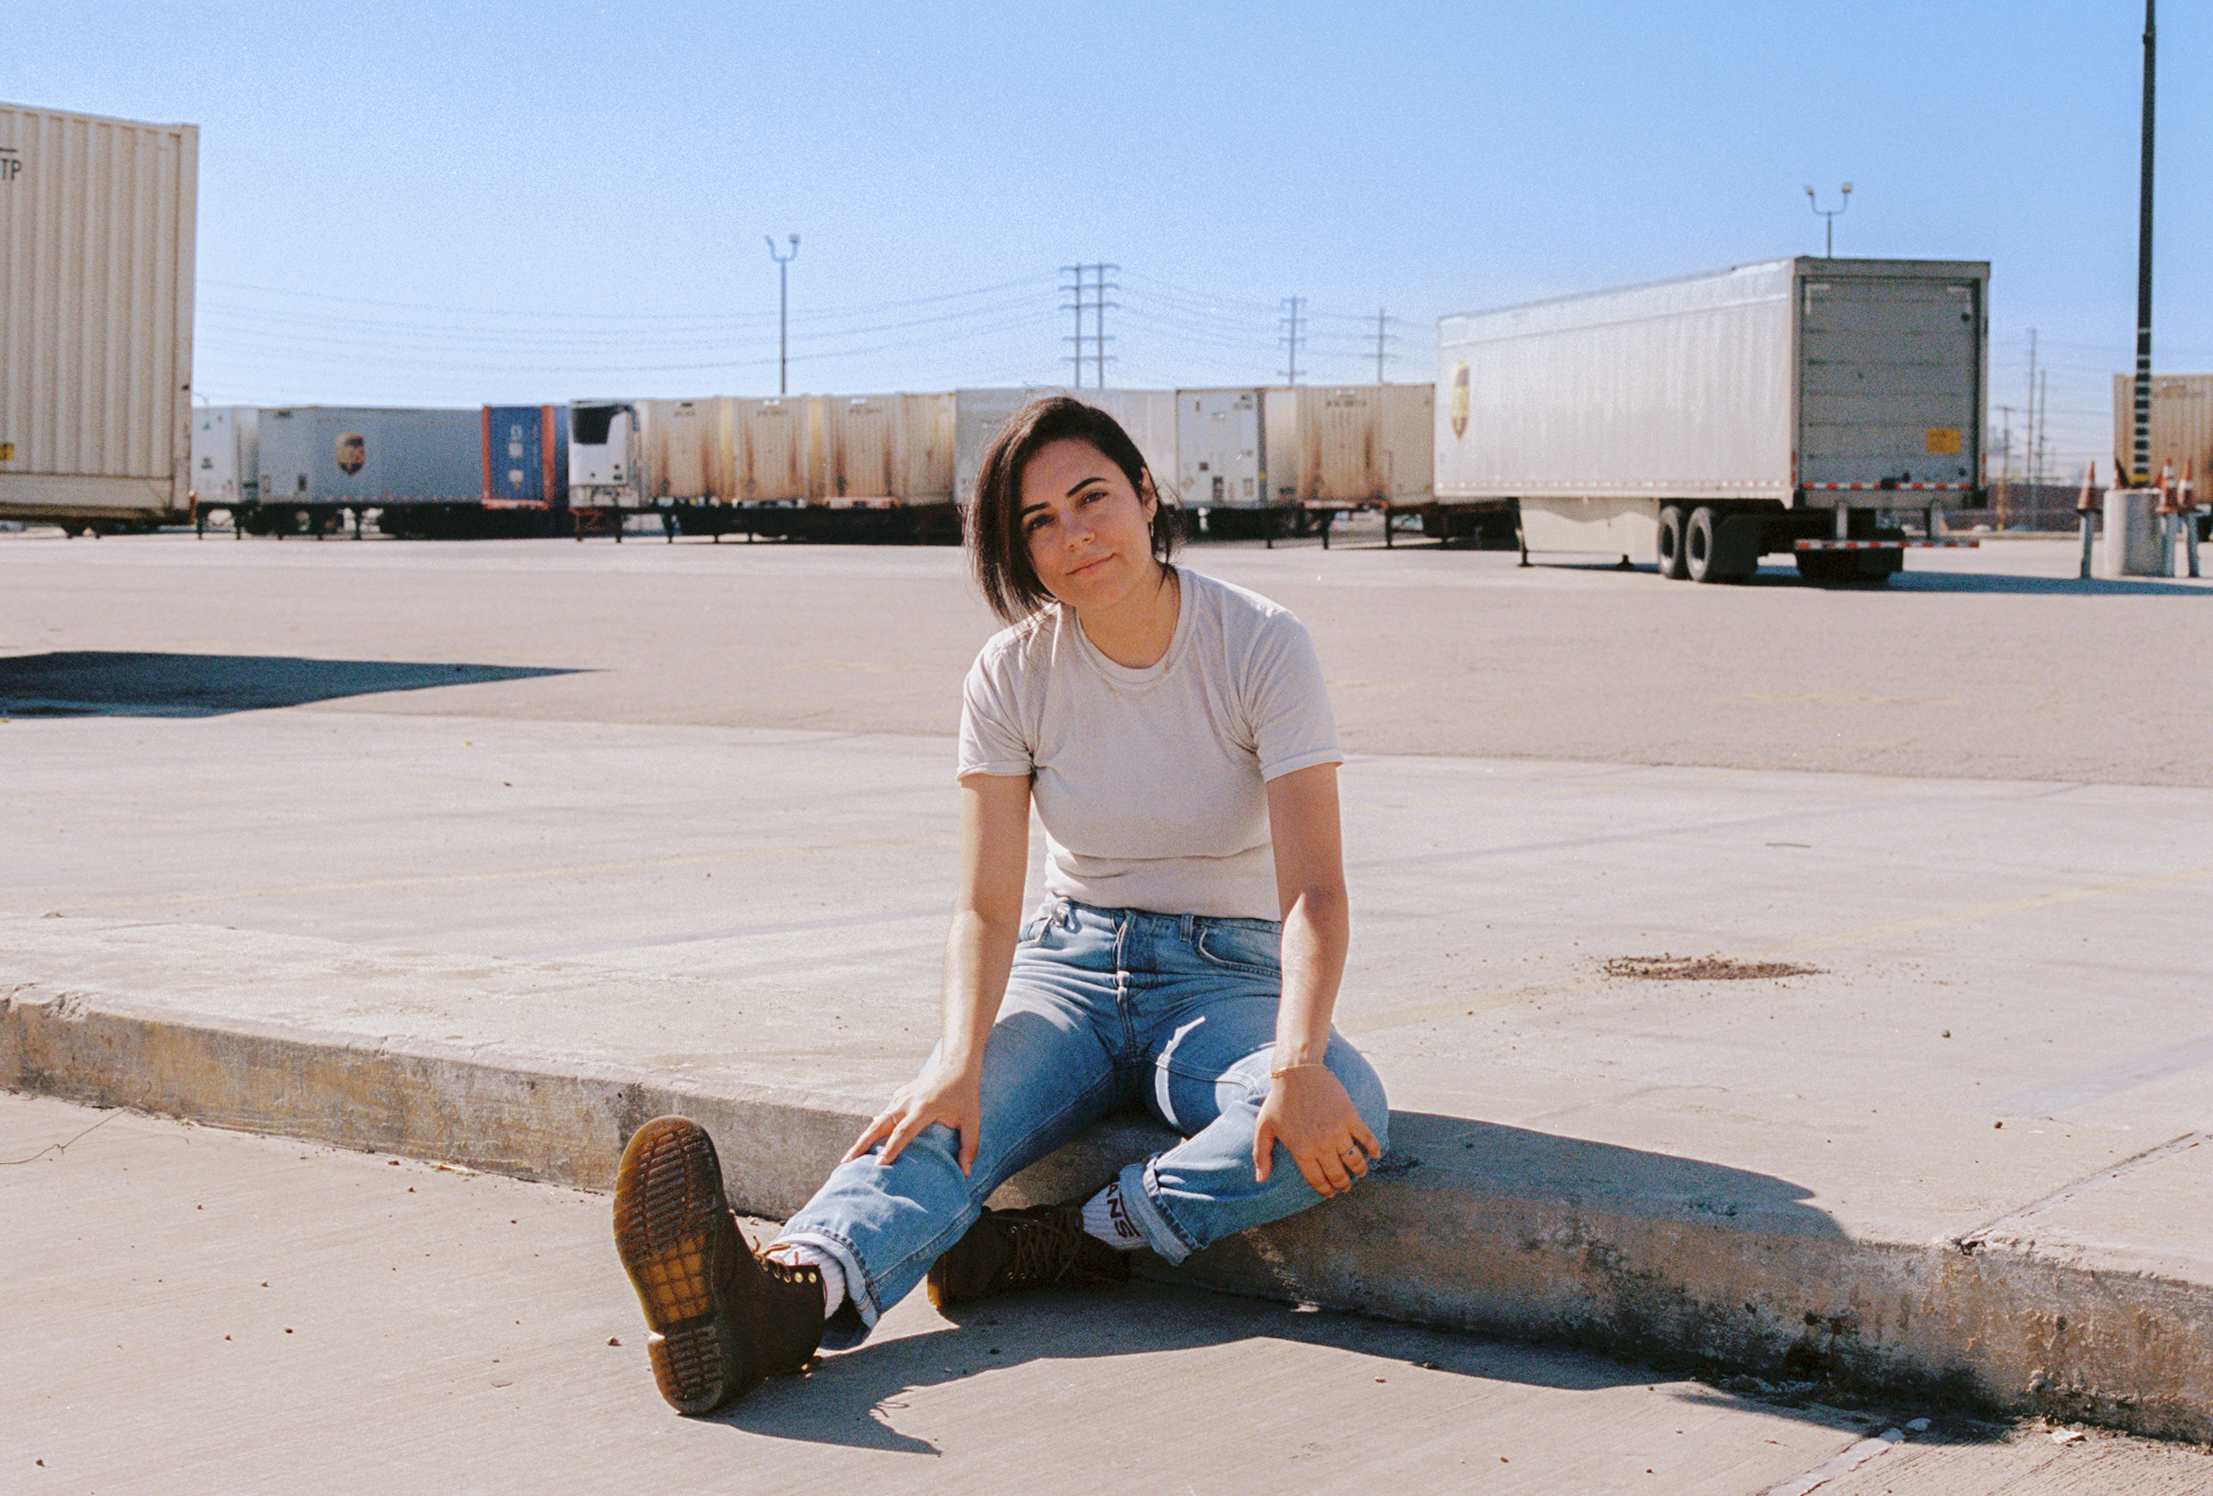 Songwriter-producer Sarah Tudzin of illuminati hotties sits on the ground in front of a train.